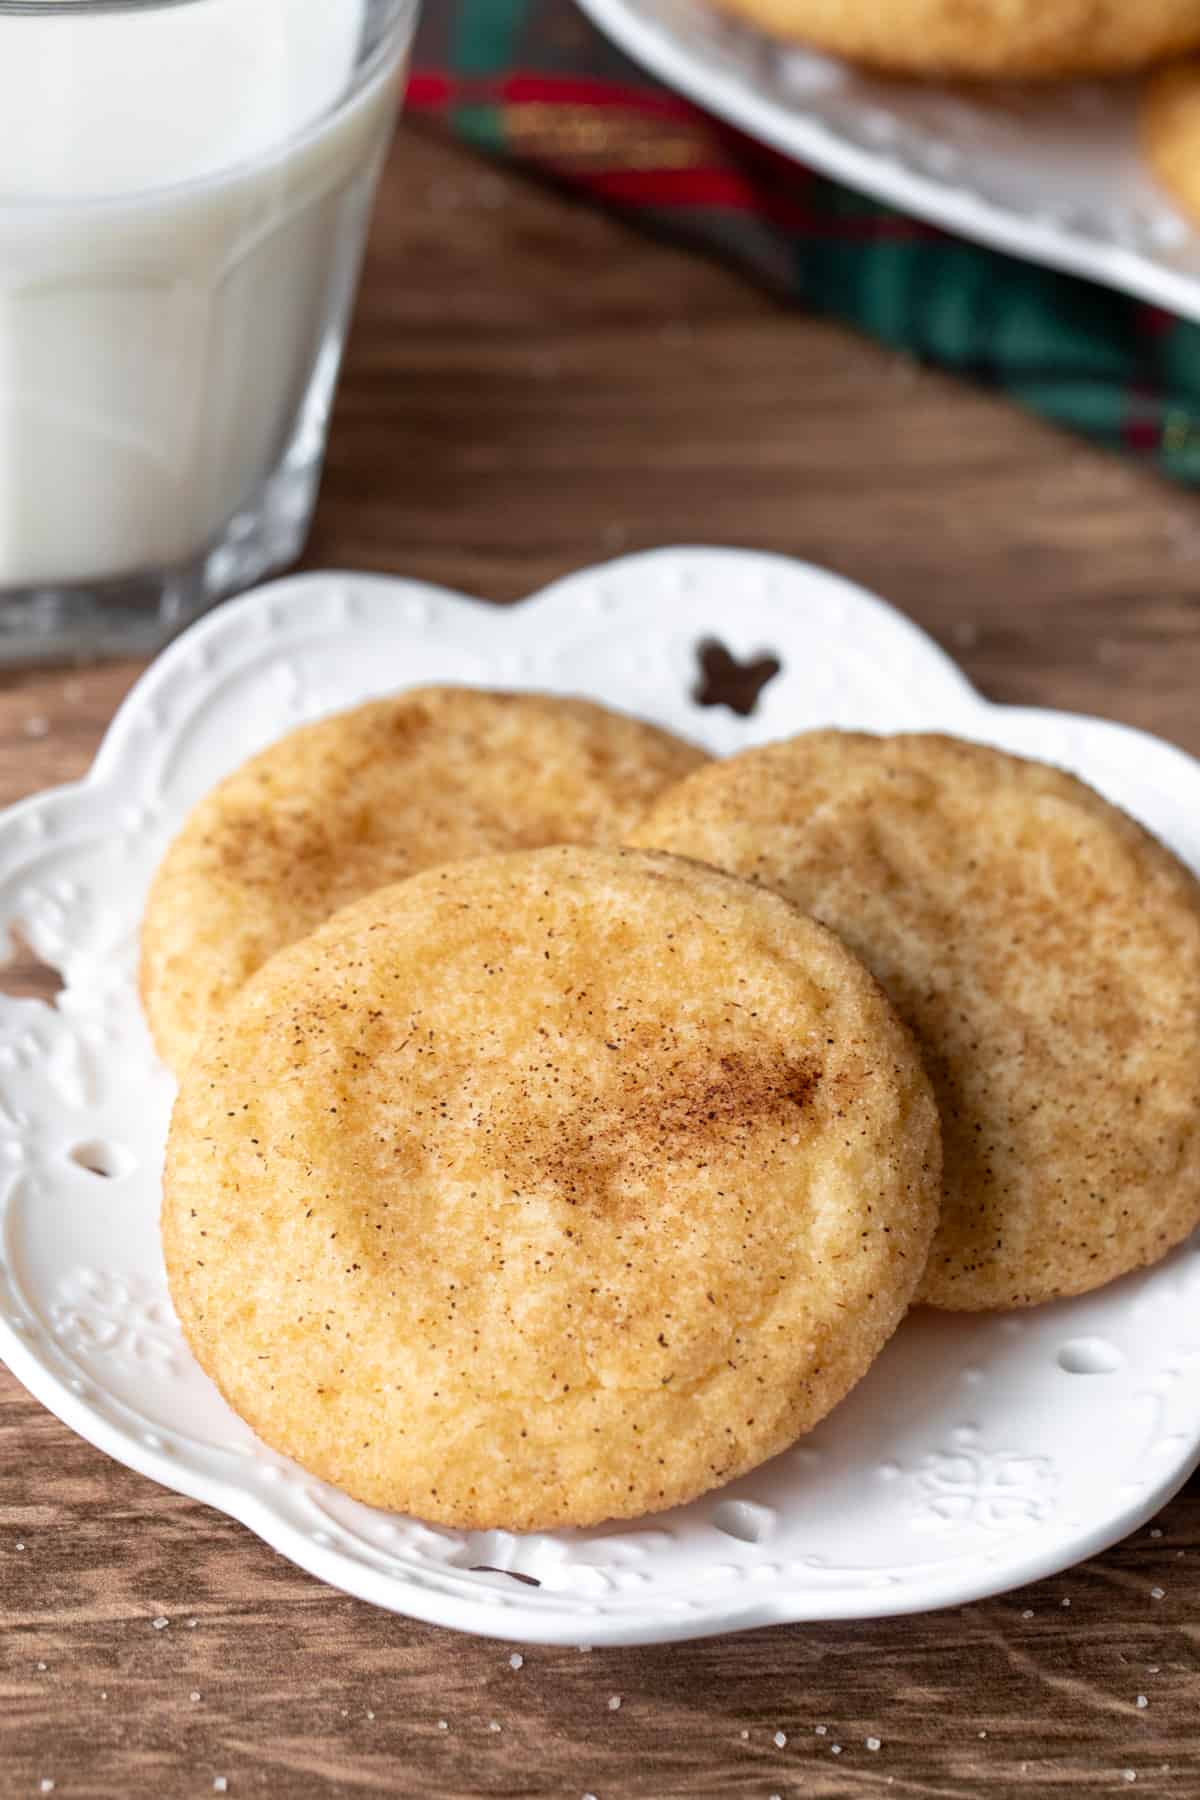 Small plate of three snickerdoodles with glass of milk